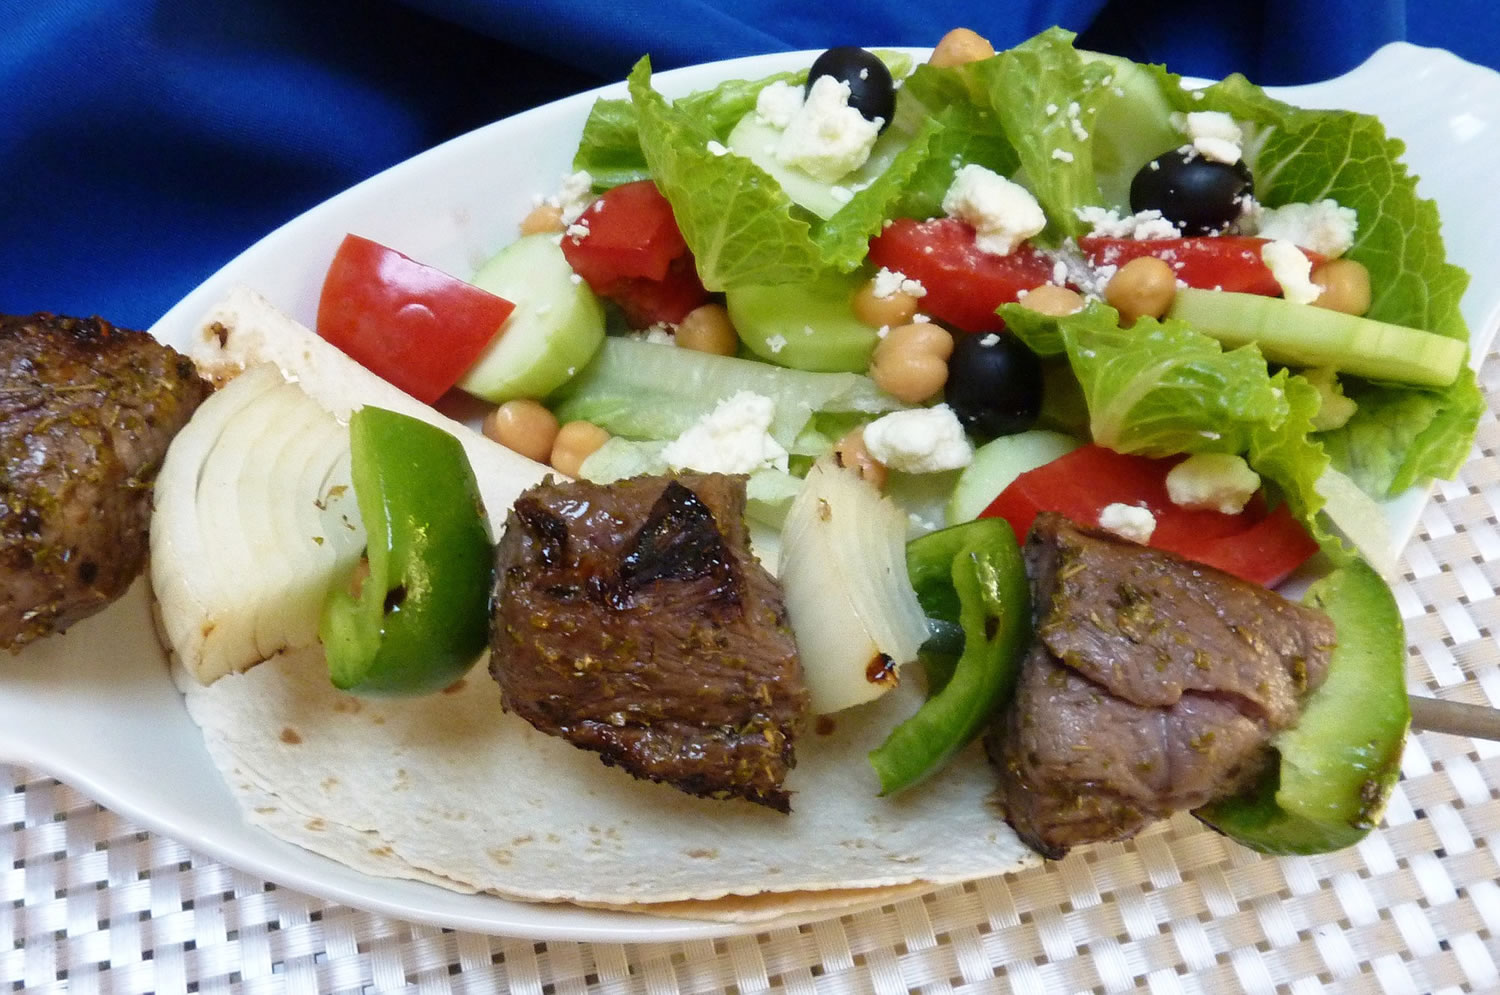 Flavorful lamb kebobs paired with a hearty salad is a great, summery meal.